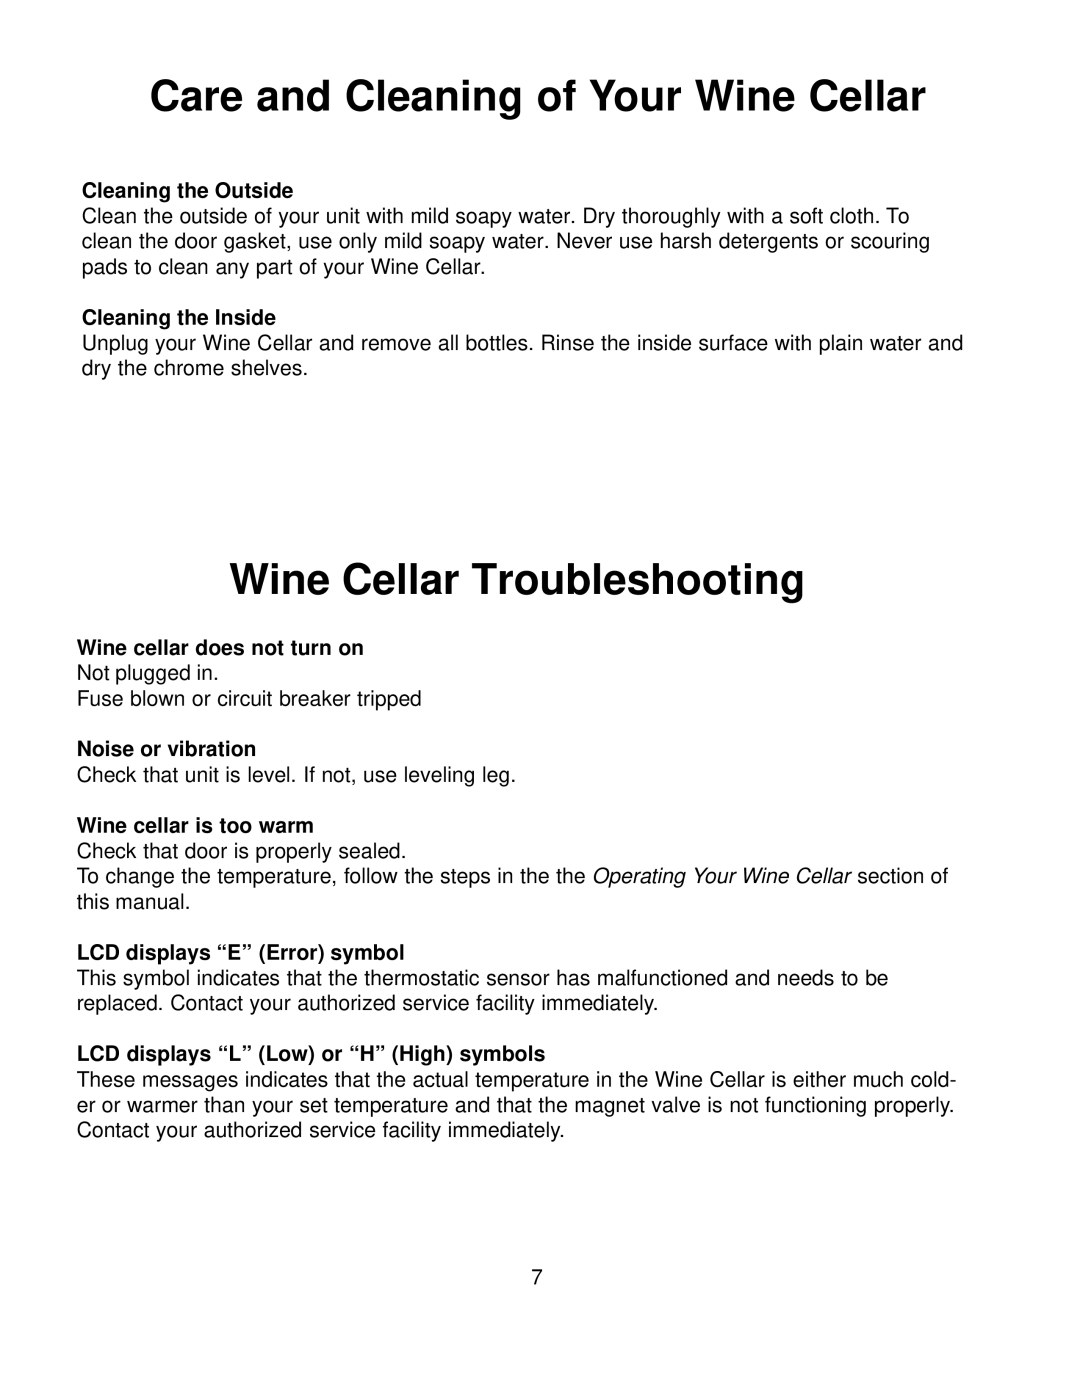 Franklin Industries, L.L.C FCW100 Care and Cleaning of Your Wine Cellar, Wine Cellar Troubleshooting, Cleaning the Outside 